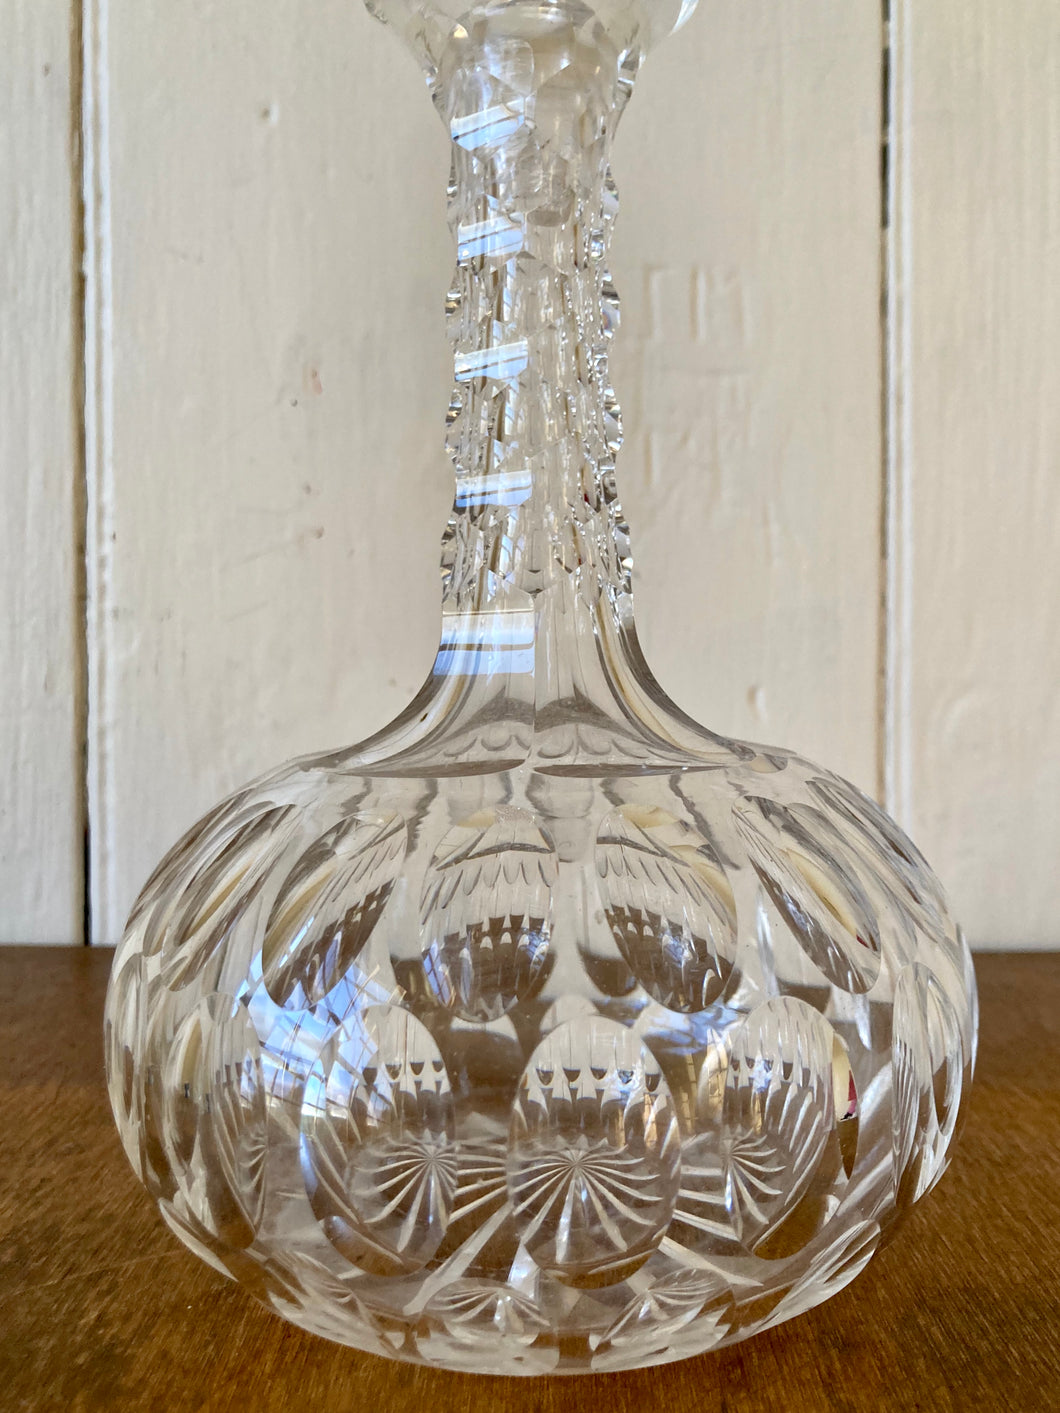 Classical lead crystal balloon-style decanter